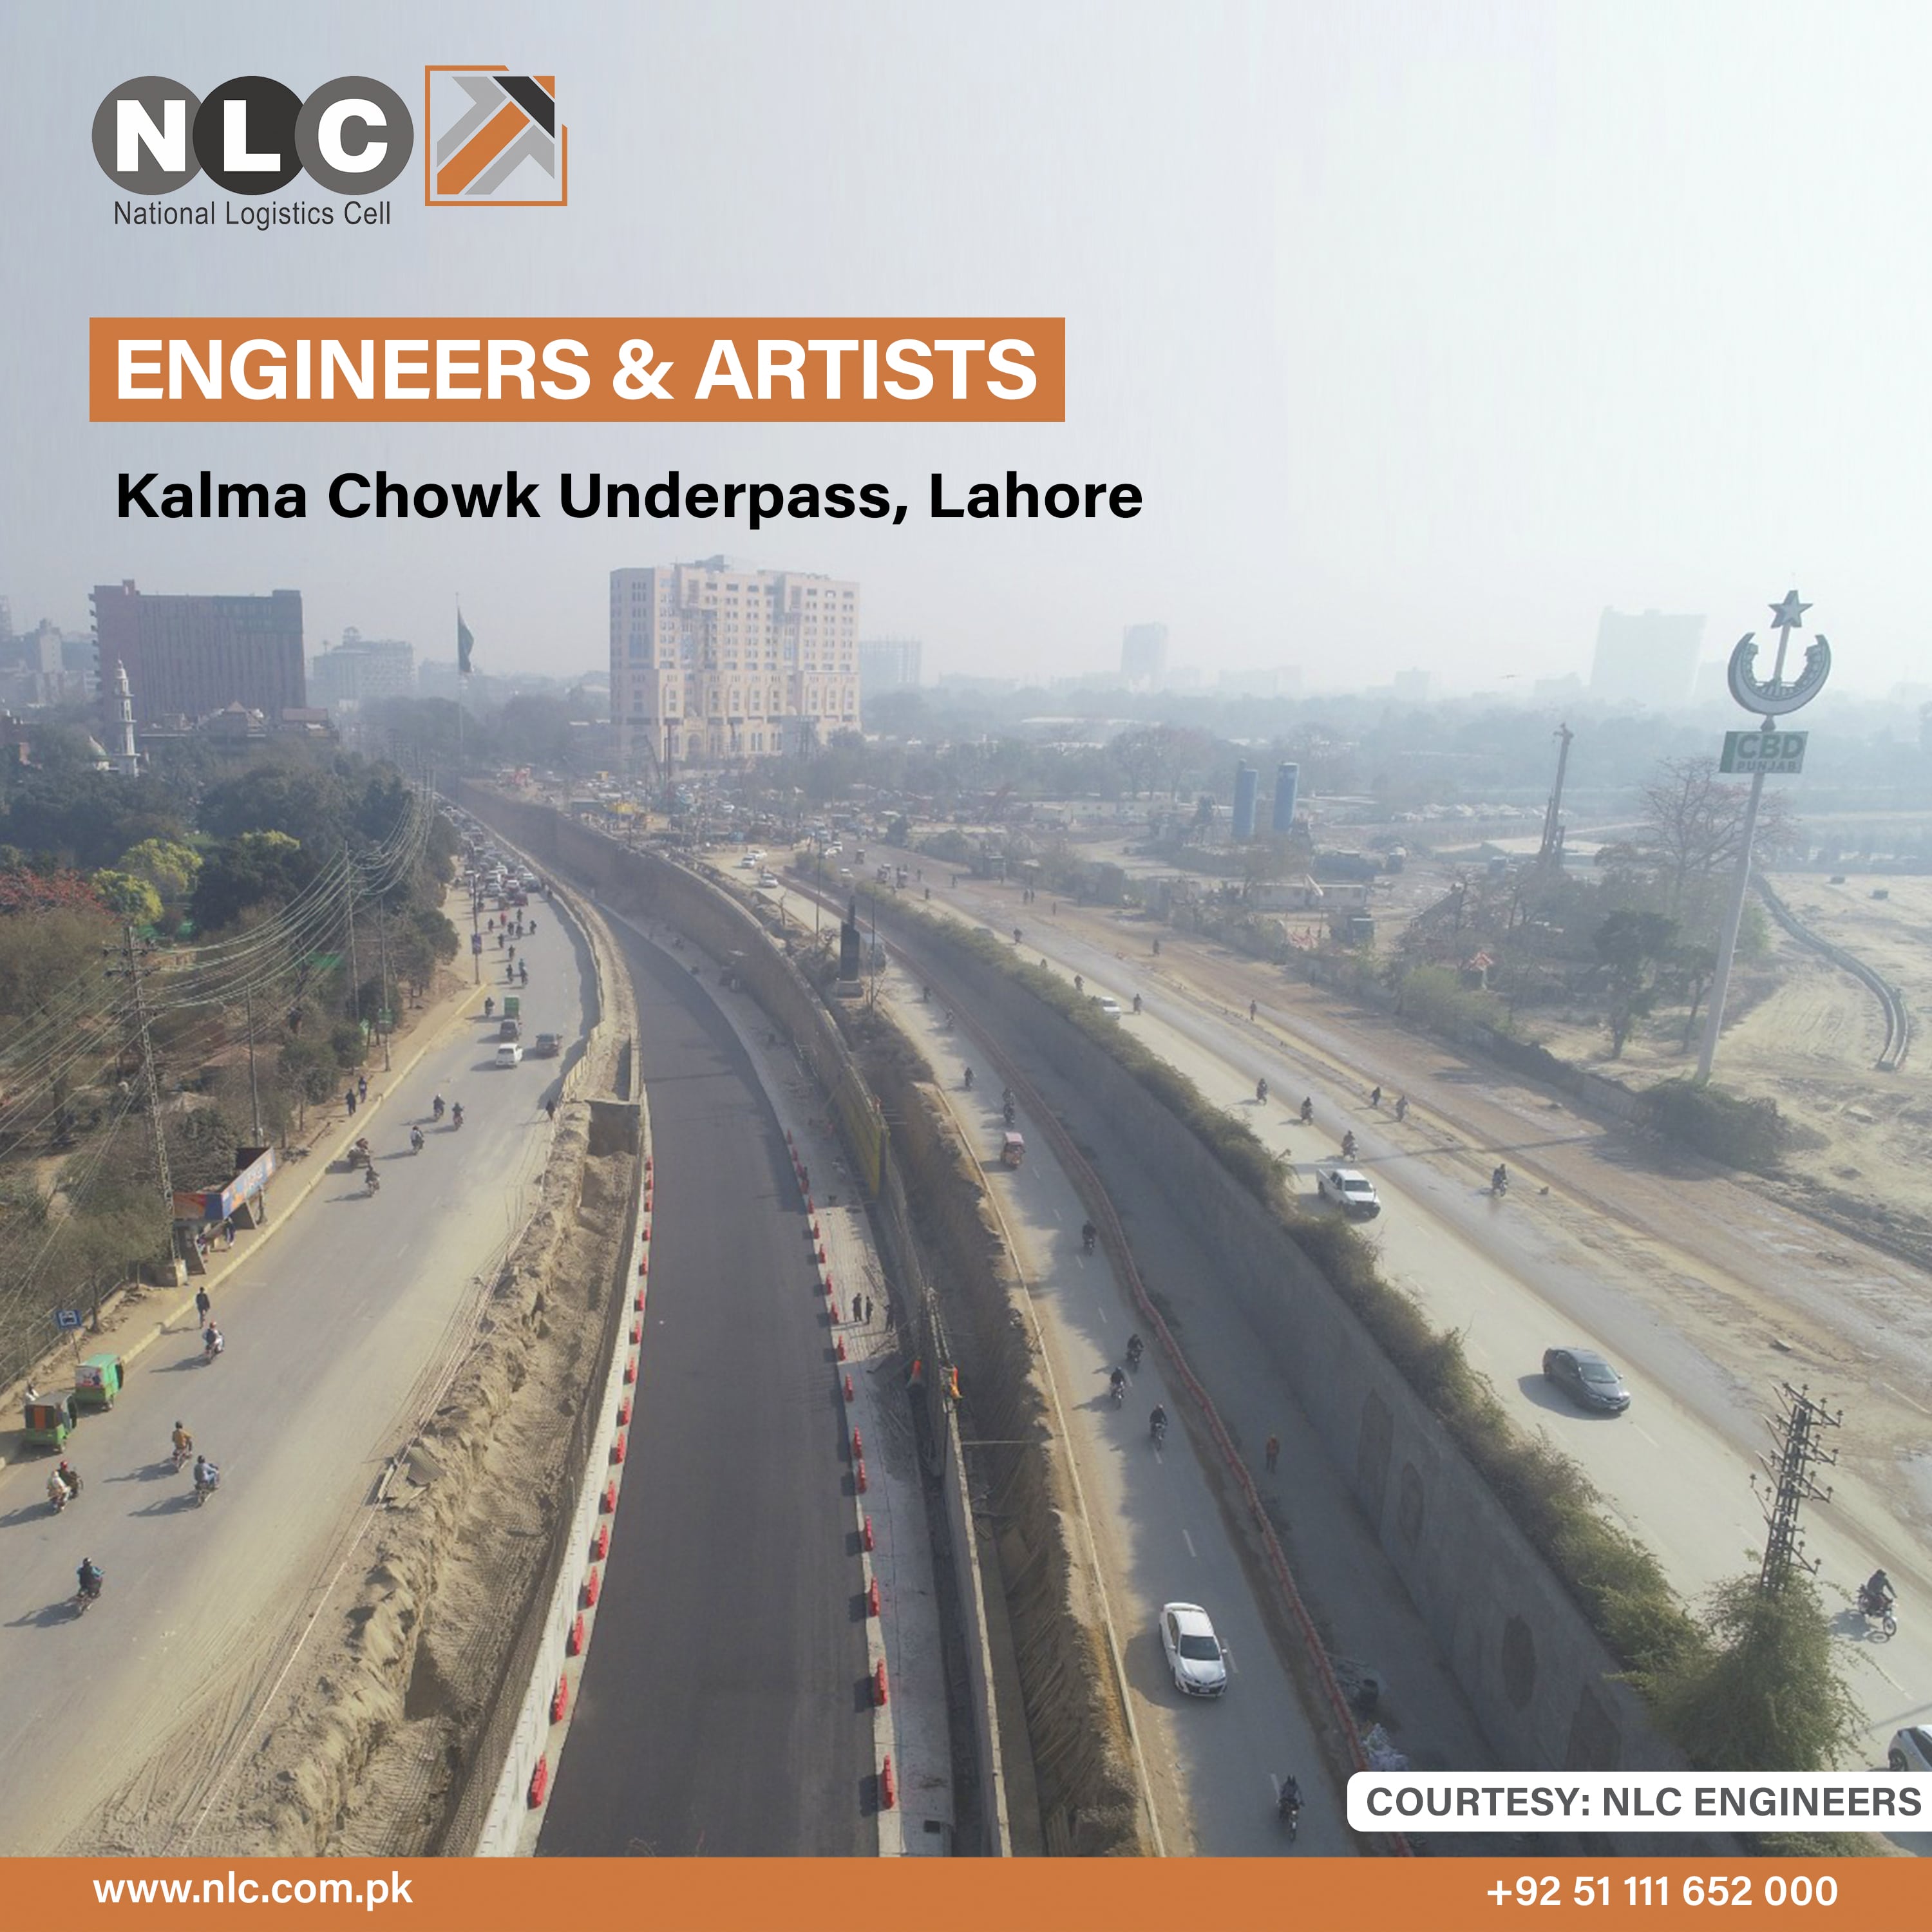 NLC partially opens 3 lanes of Kalma Chowk, Lahore for PSL